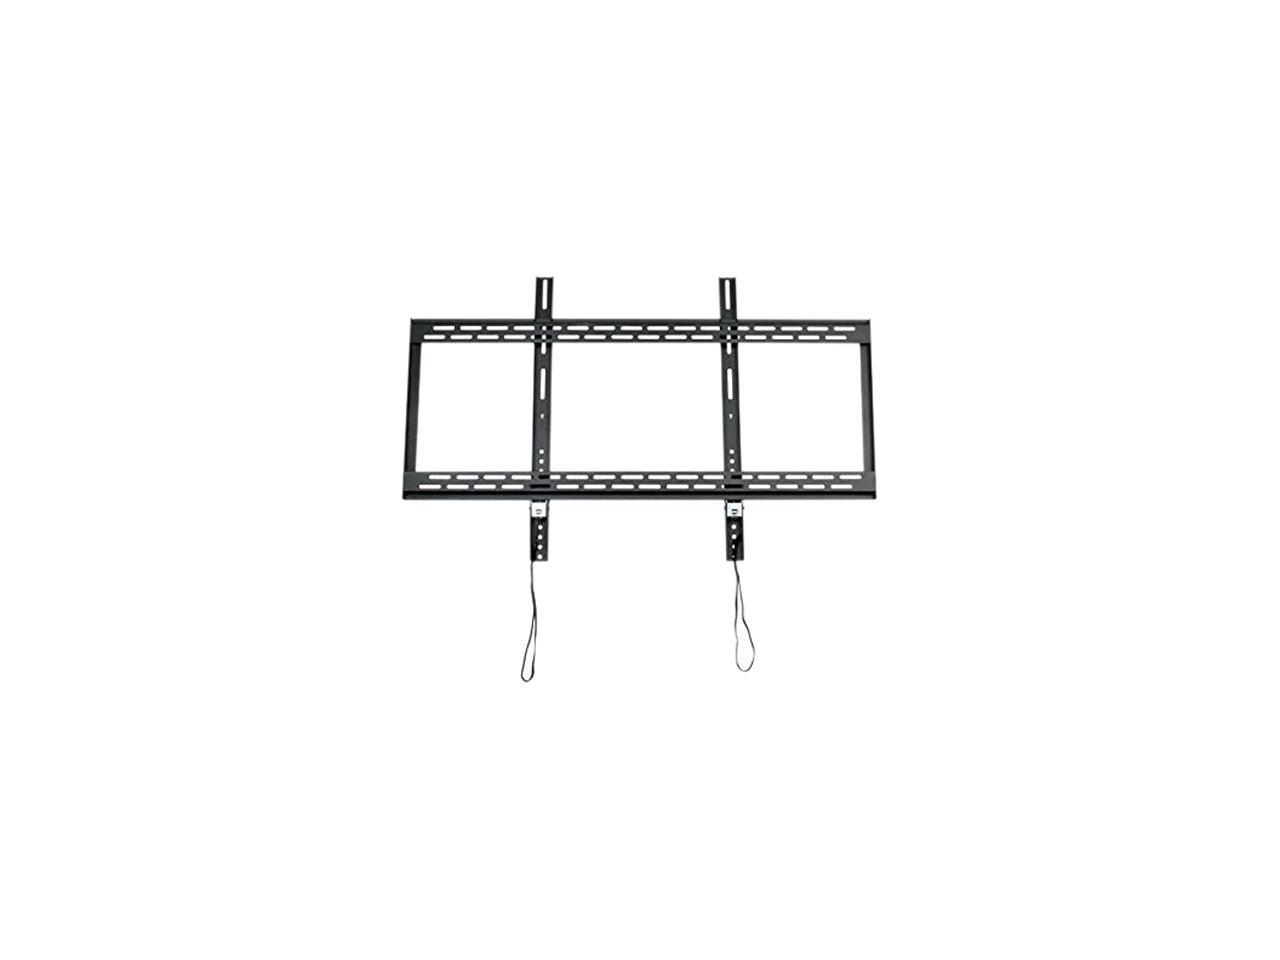 Tripp Lite DWF60100XX 60"-100" Fixed TV wall mount LED & LCD HDTV up to VESA 900x600 max load 350 lbs Compatible with Samsung, Vizio, Sony, Panasonic, LG and Toshiba TV - image 2 of 4